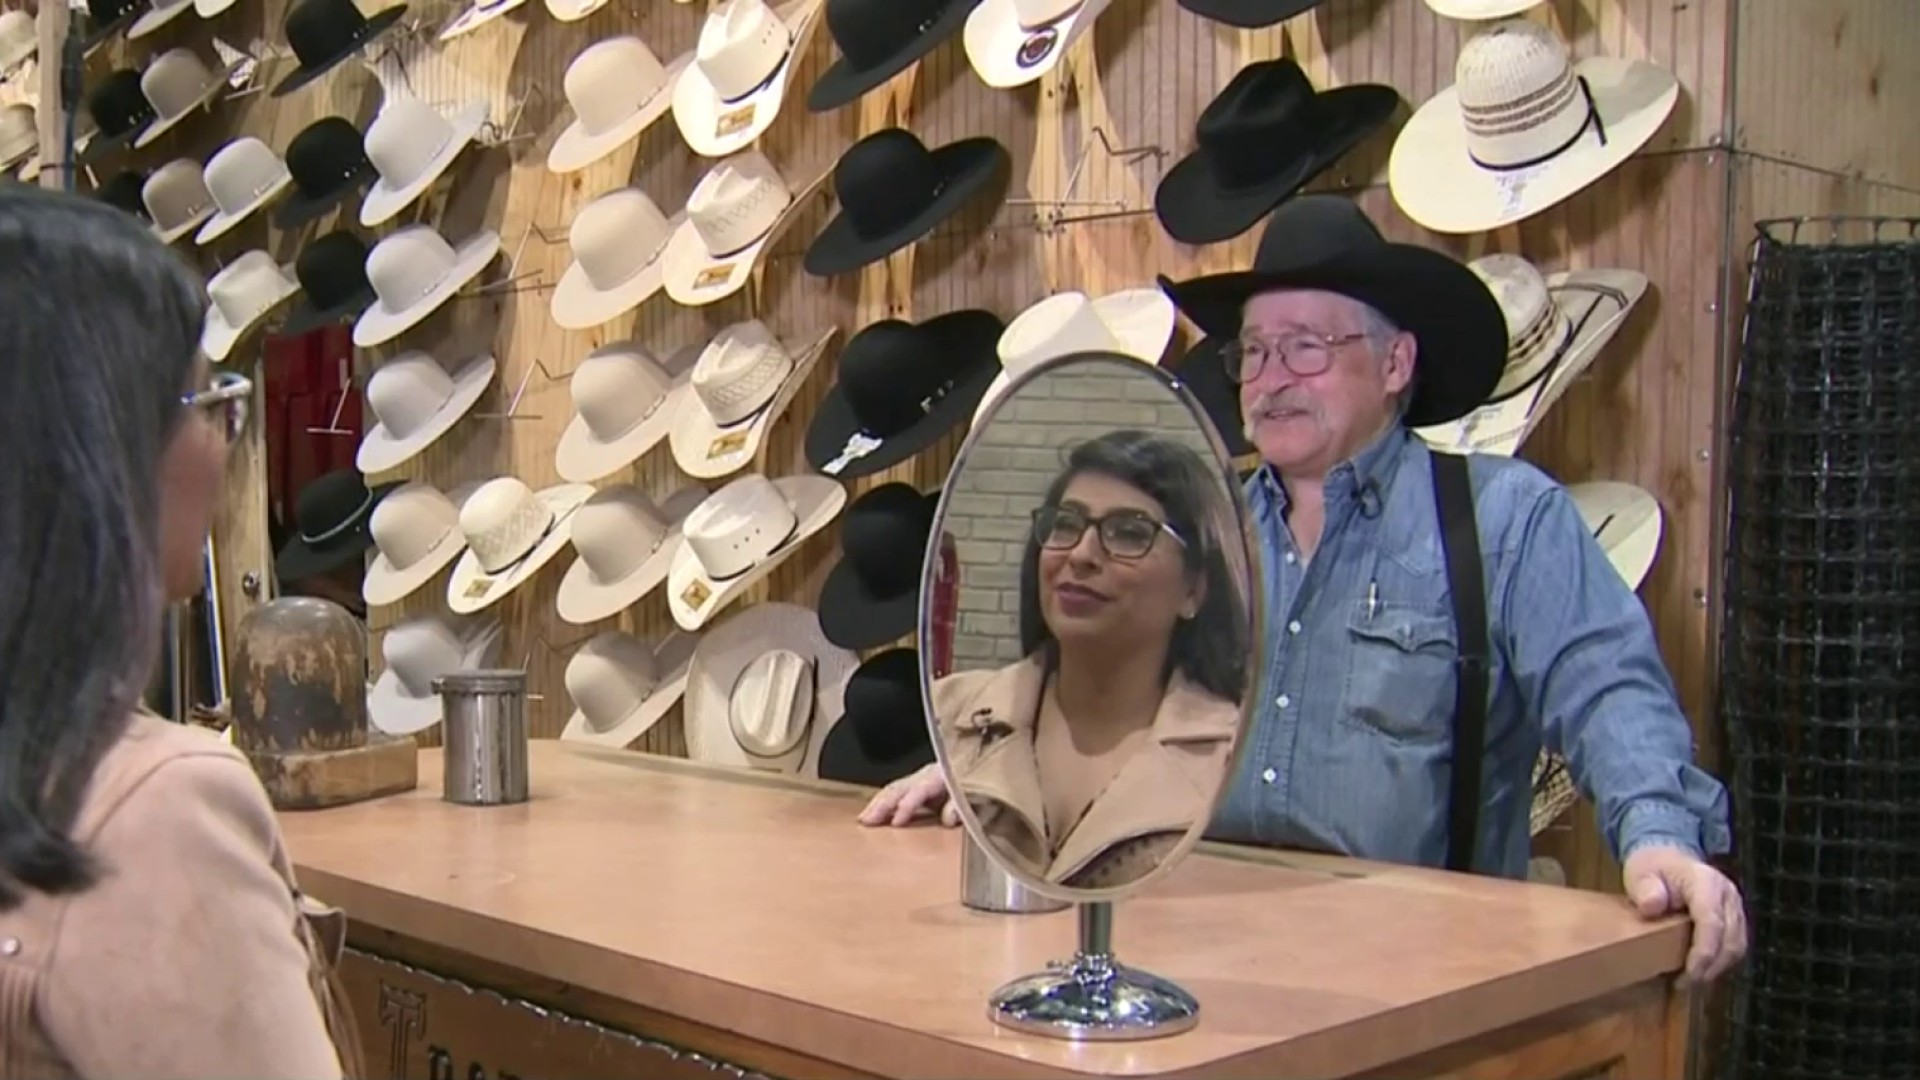 Custom hat makers fit Lubbock customers' shapes, personalities